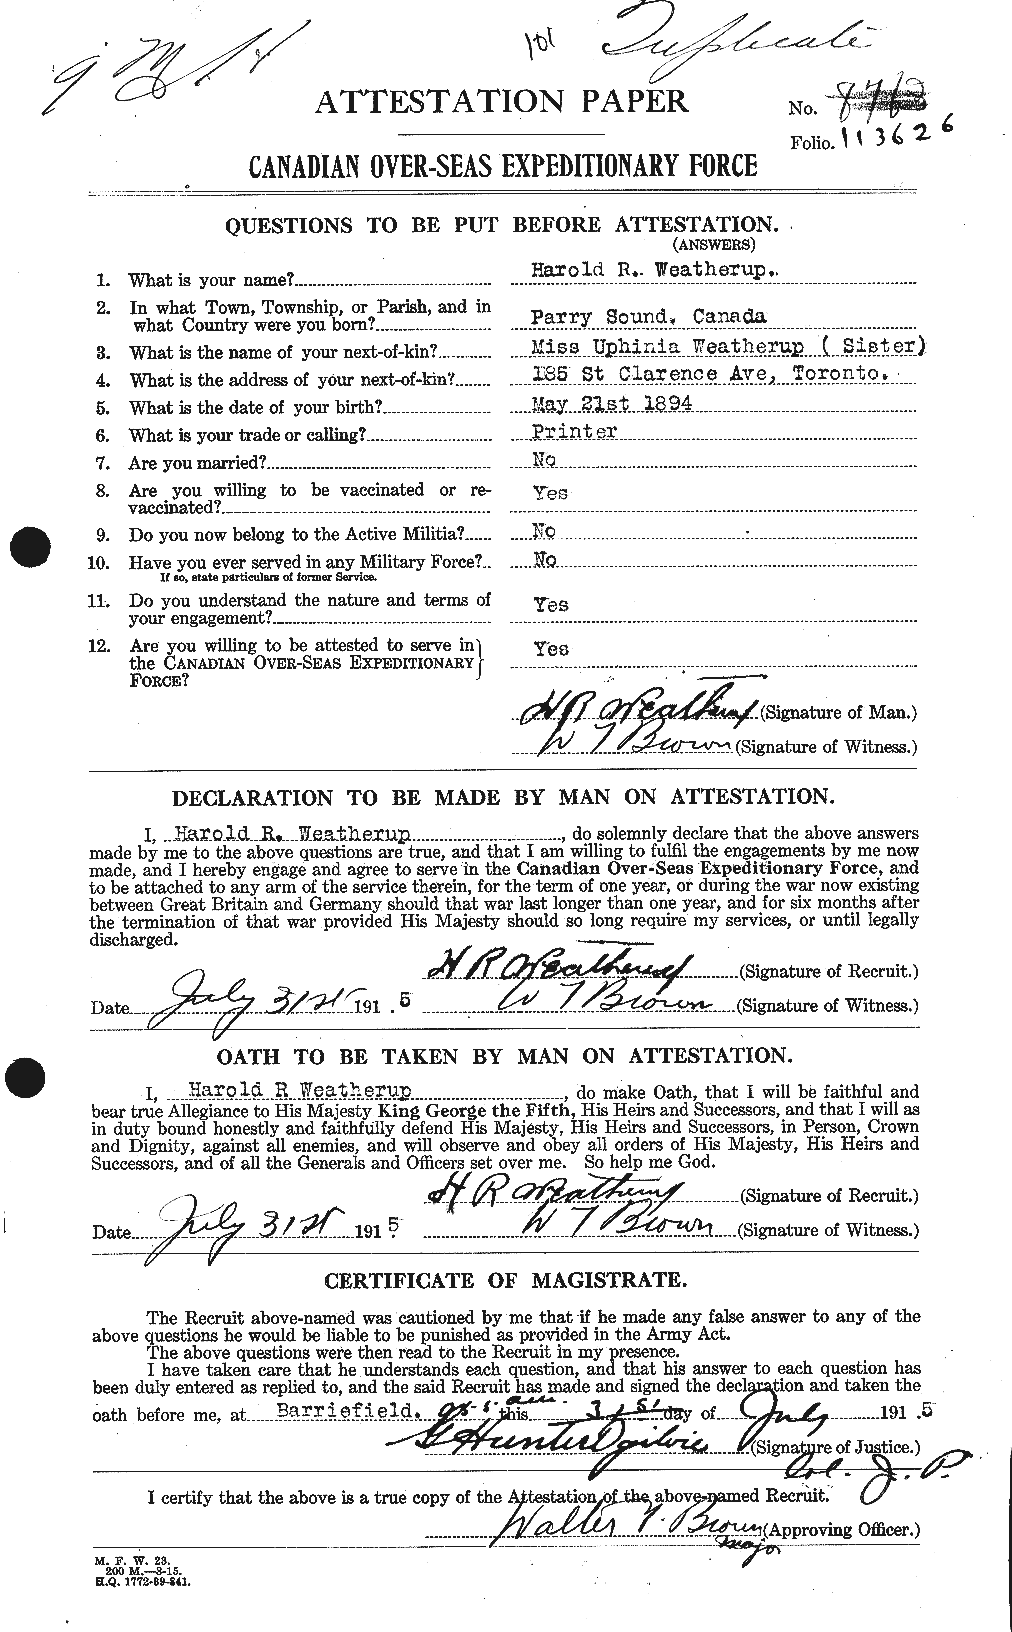 Personnel Records of the First World War - CEF 664287a